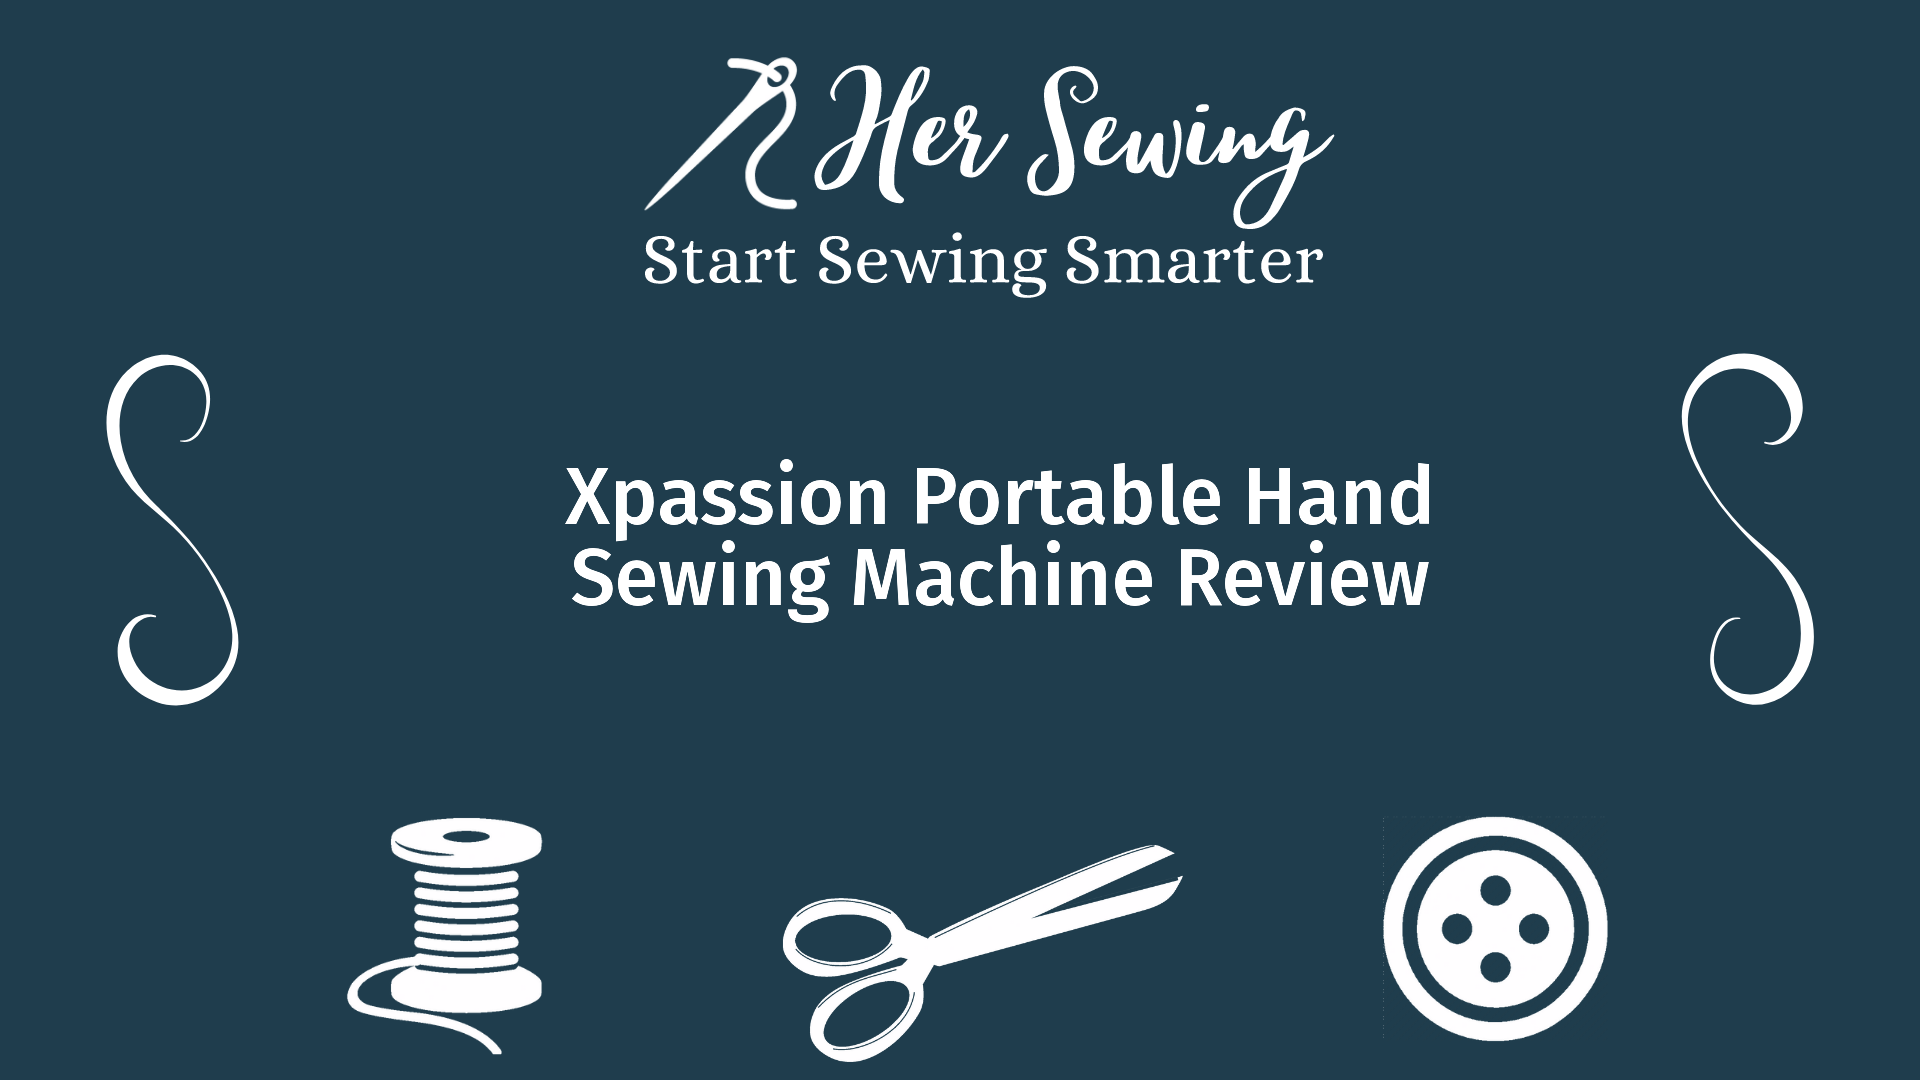 Xpassion Portable Hand Sewing Machine Review